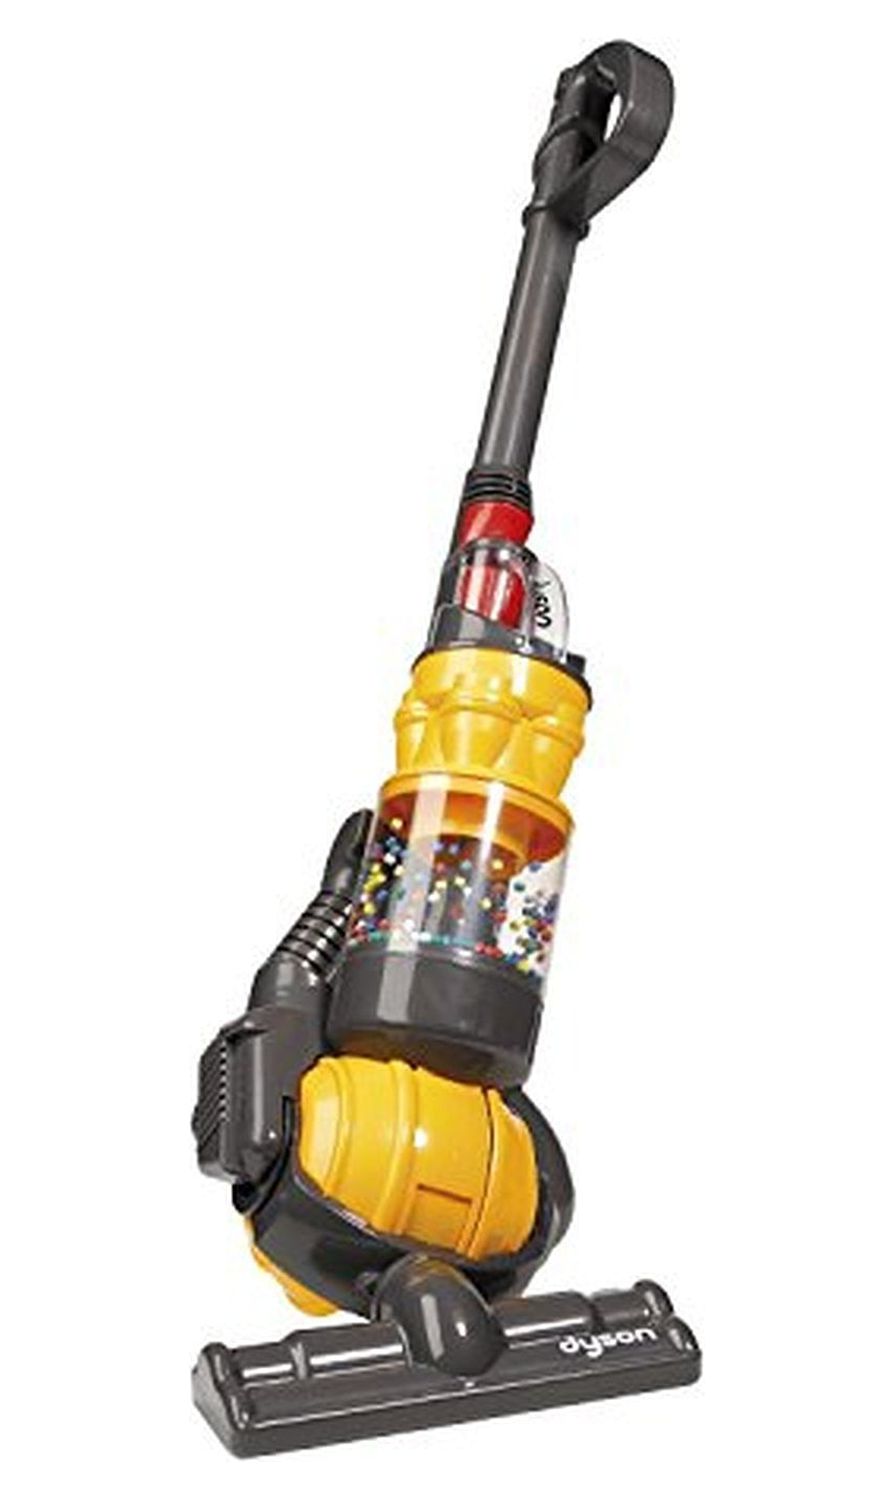 Toy Vacuum- Dyson Ball Vacuum With Real Suction and Sounds - image 1 of 6